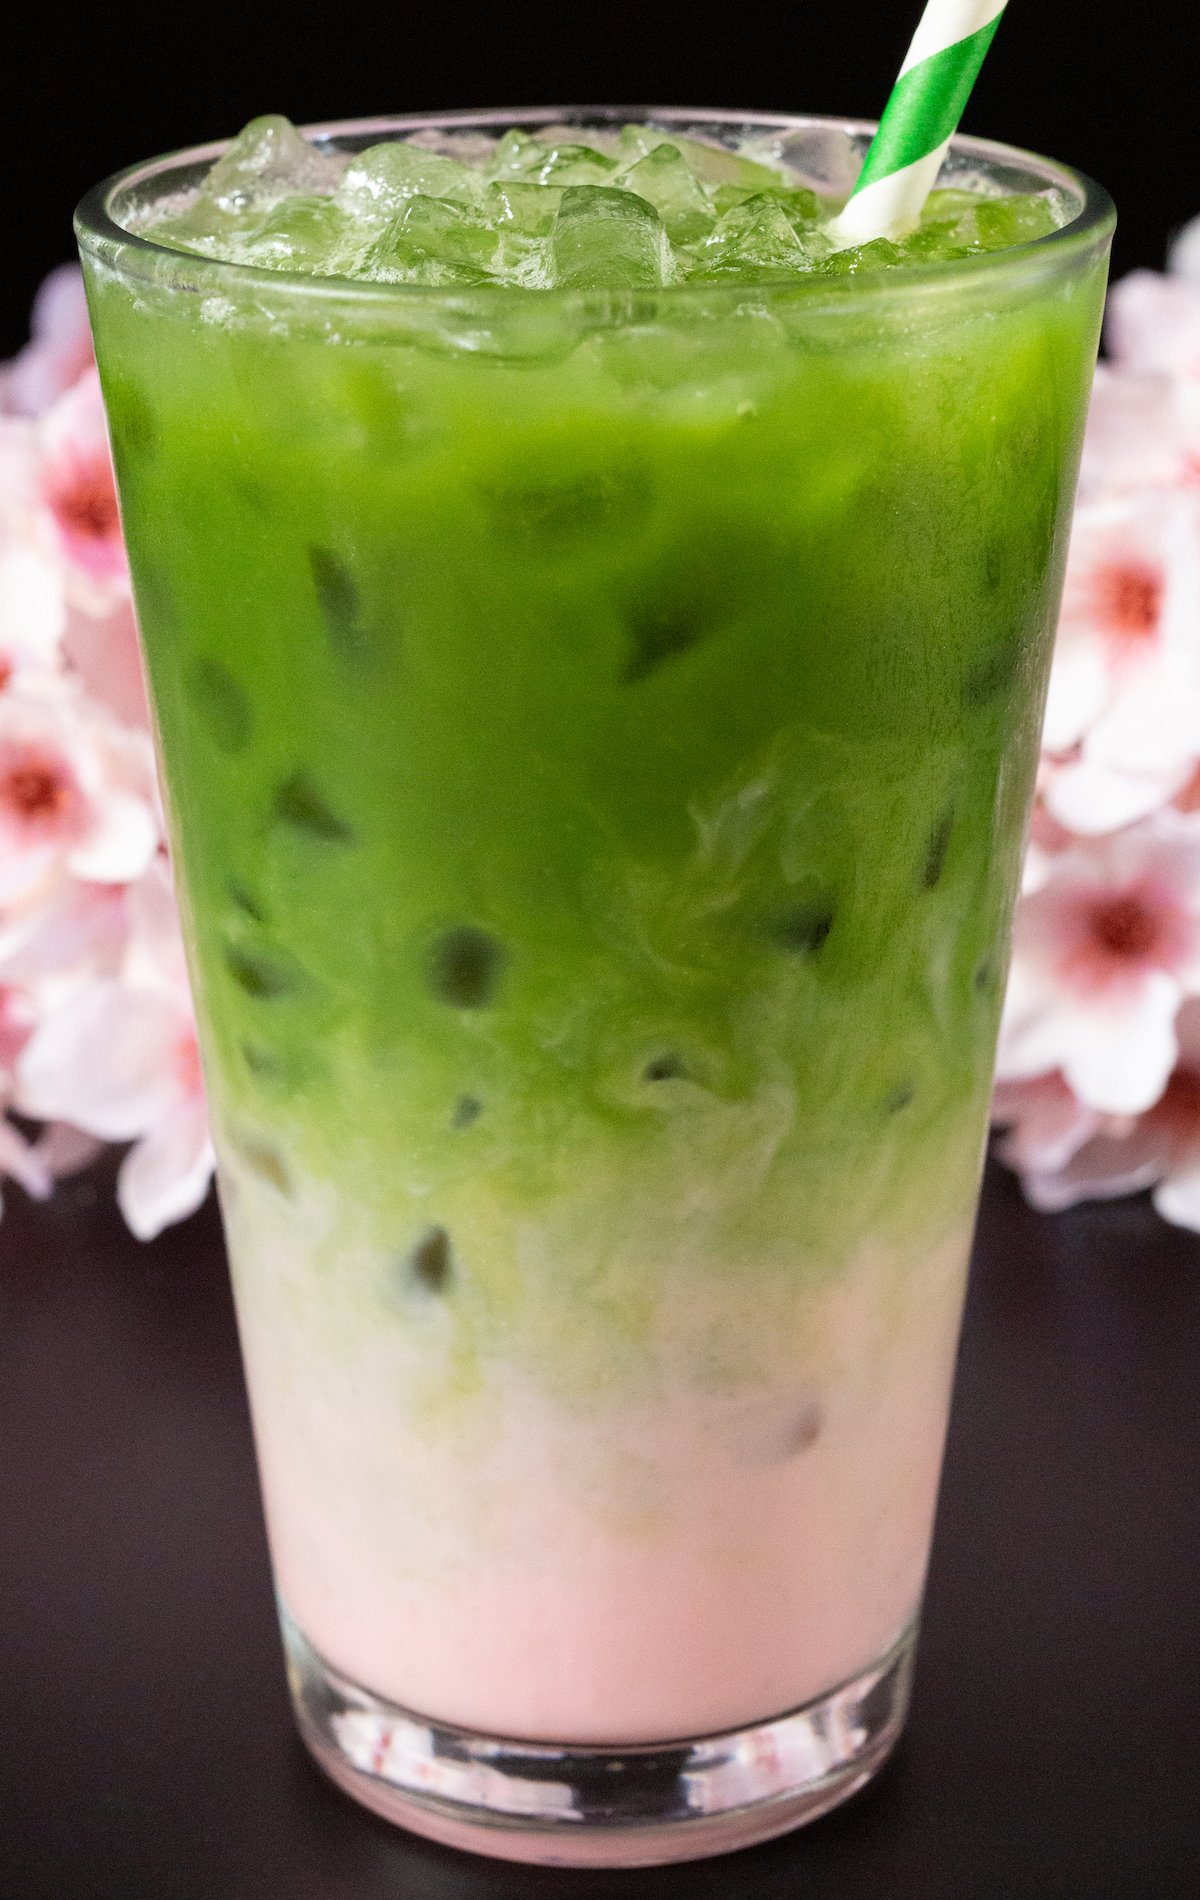 A pint glass is half filled with pink cherry blossom syrup and the top half filled with green matcha. Cherry blossoms are out of focus in the bakcground.